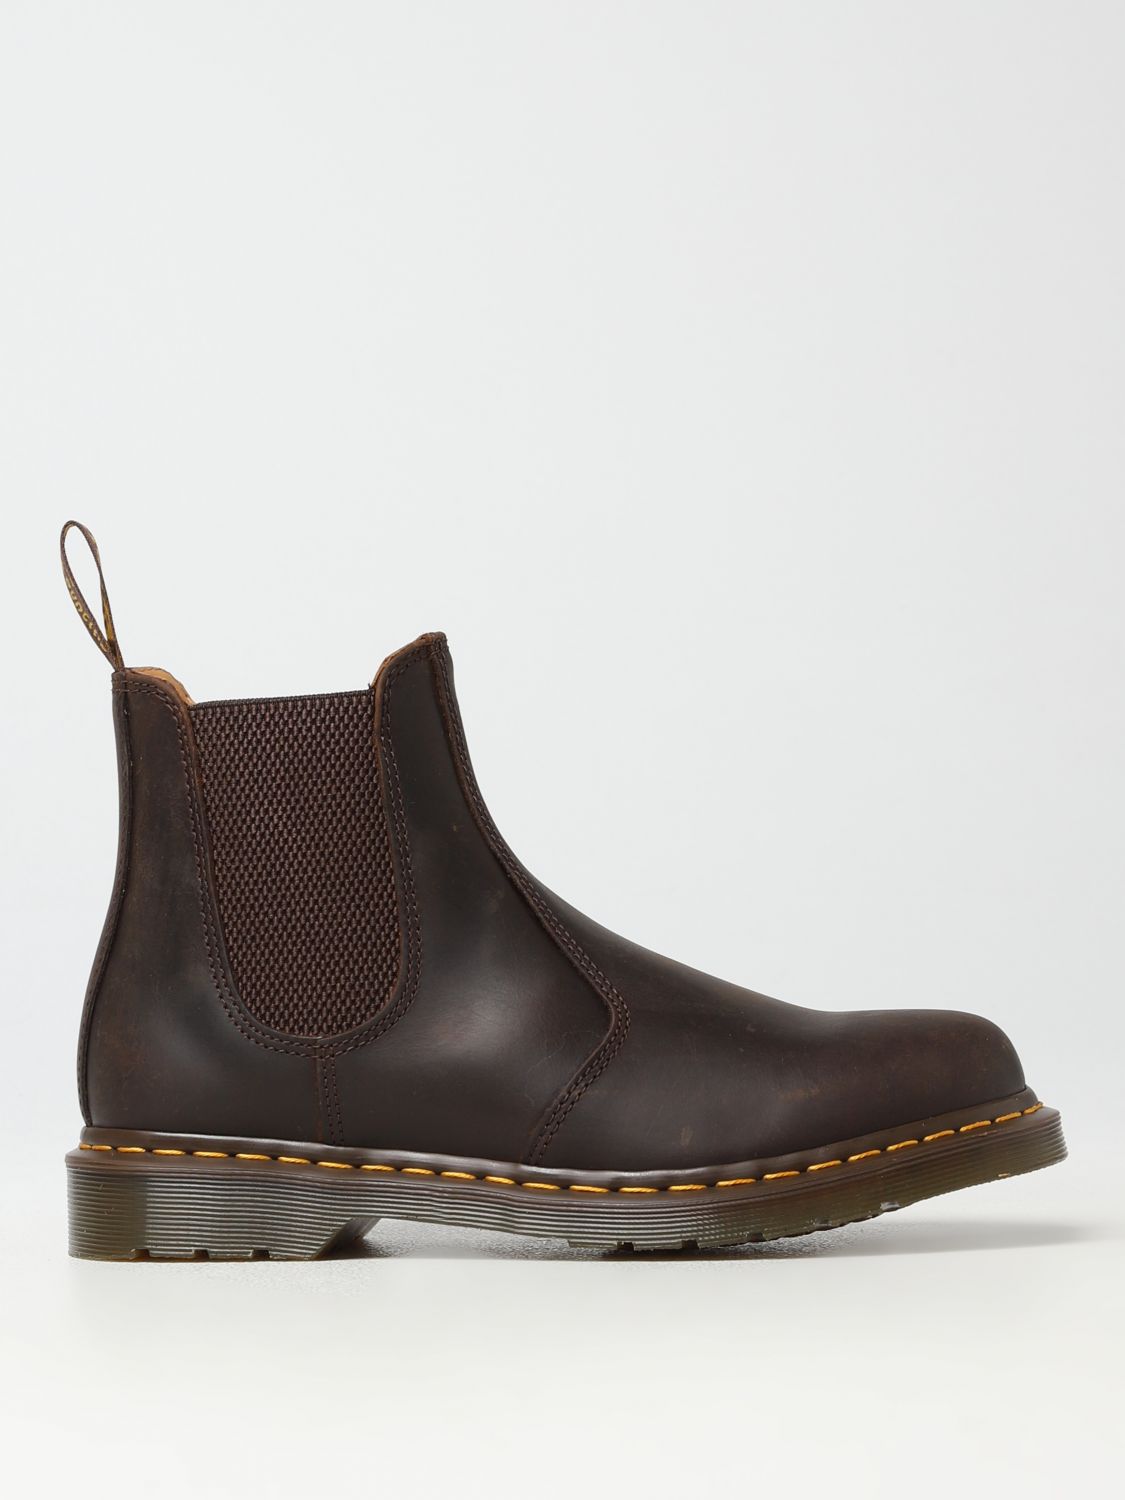 Dr. Martens 2976 YS Chelsea Boot